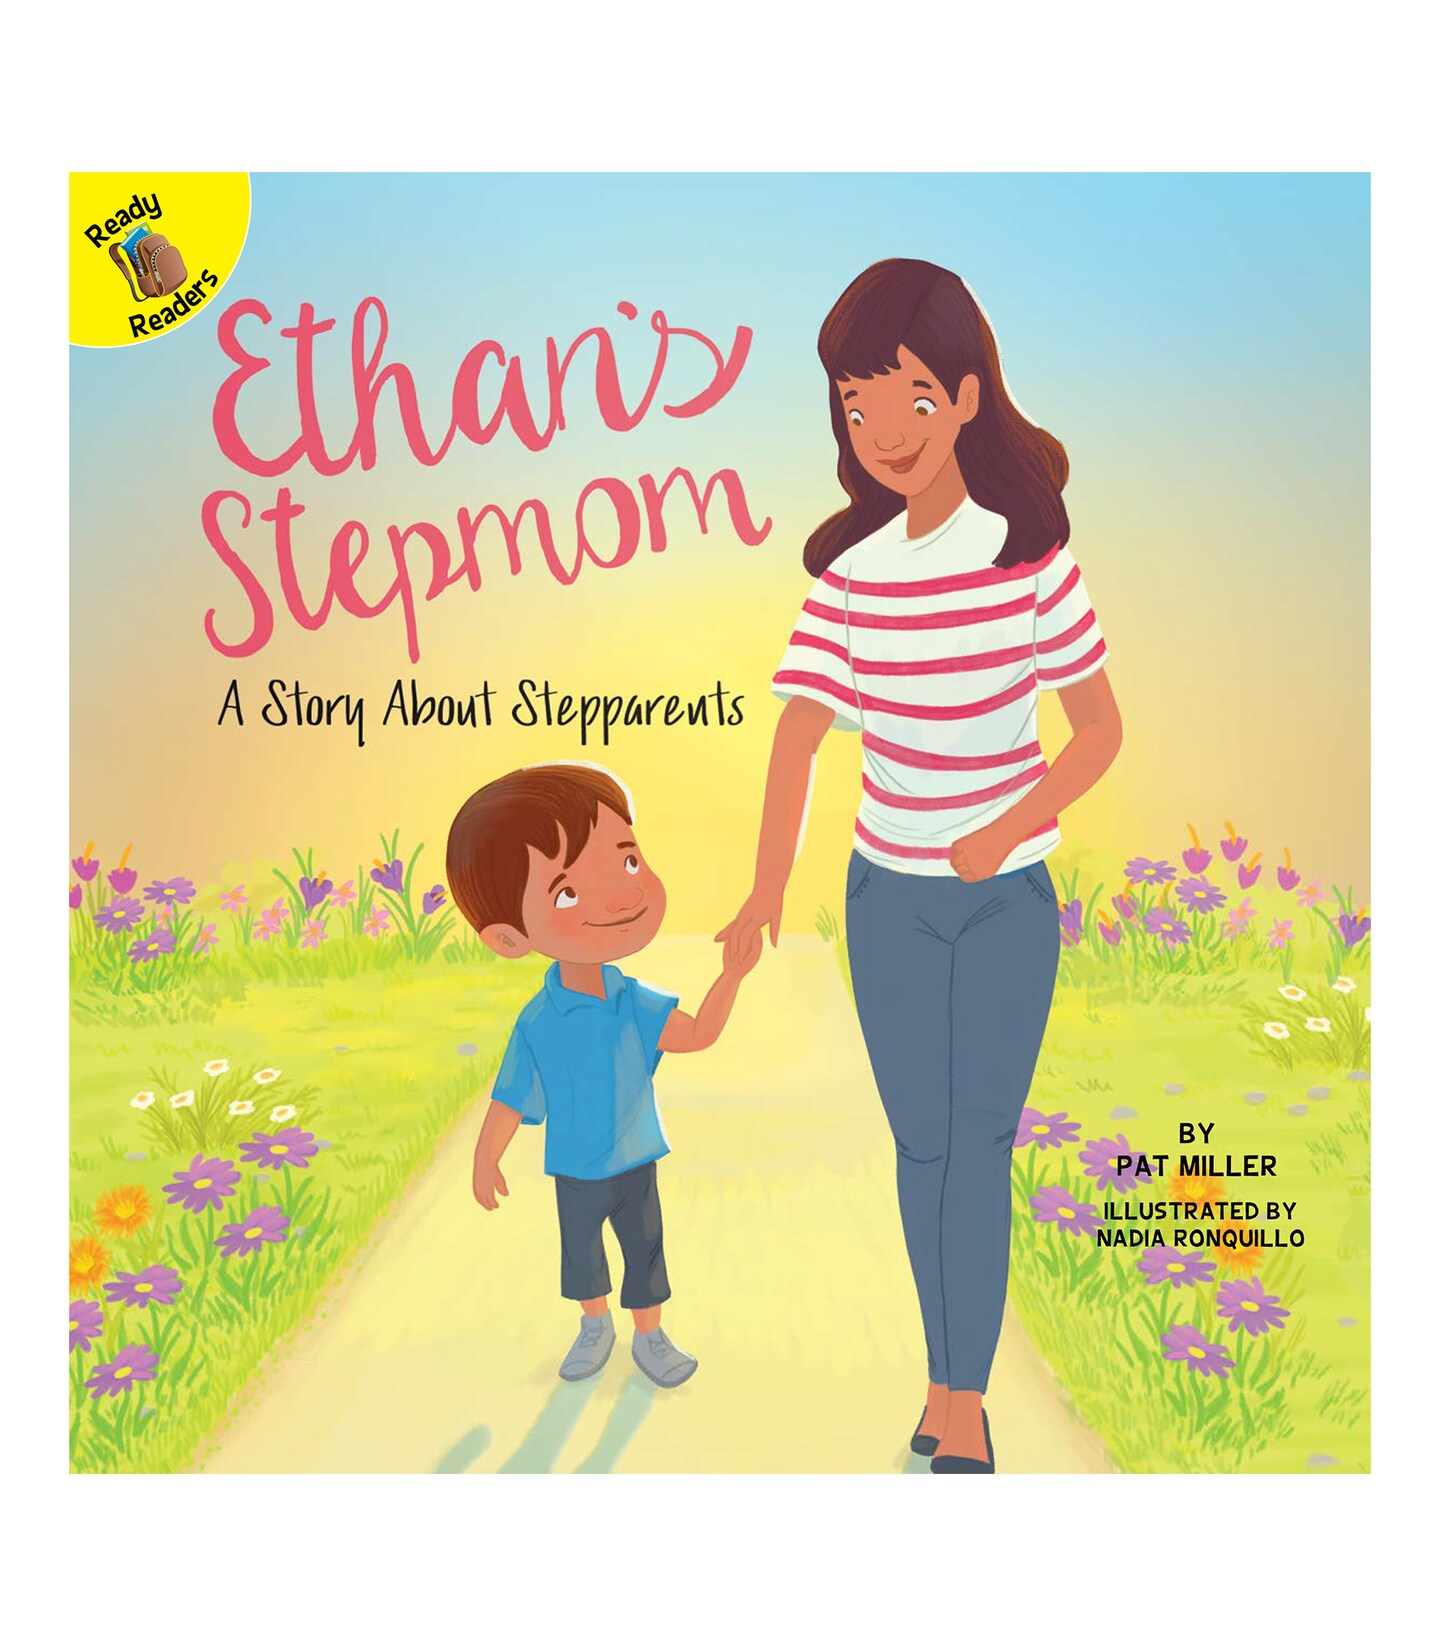 Rourke Educational Media Ethan&#x27;s Stepmom: A Story About Stepparents&#x2014;Children&#x27;s Book About Losing a Parent and Remarriage, Kindergarten-2nd Grade (24 pgs) Reader